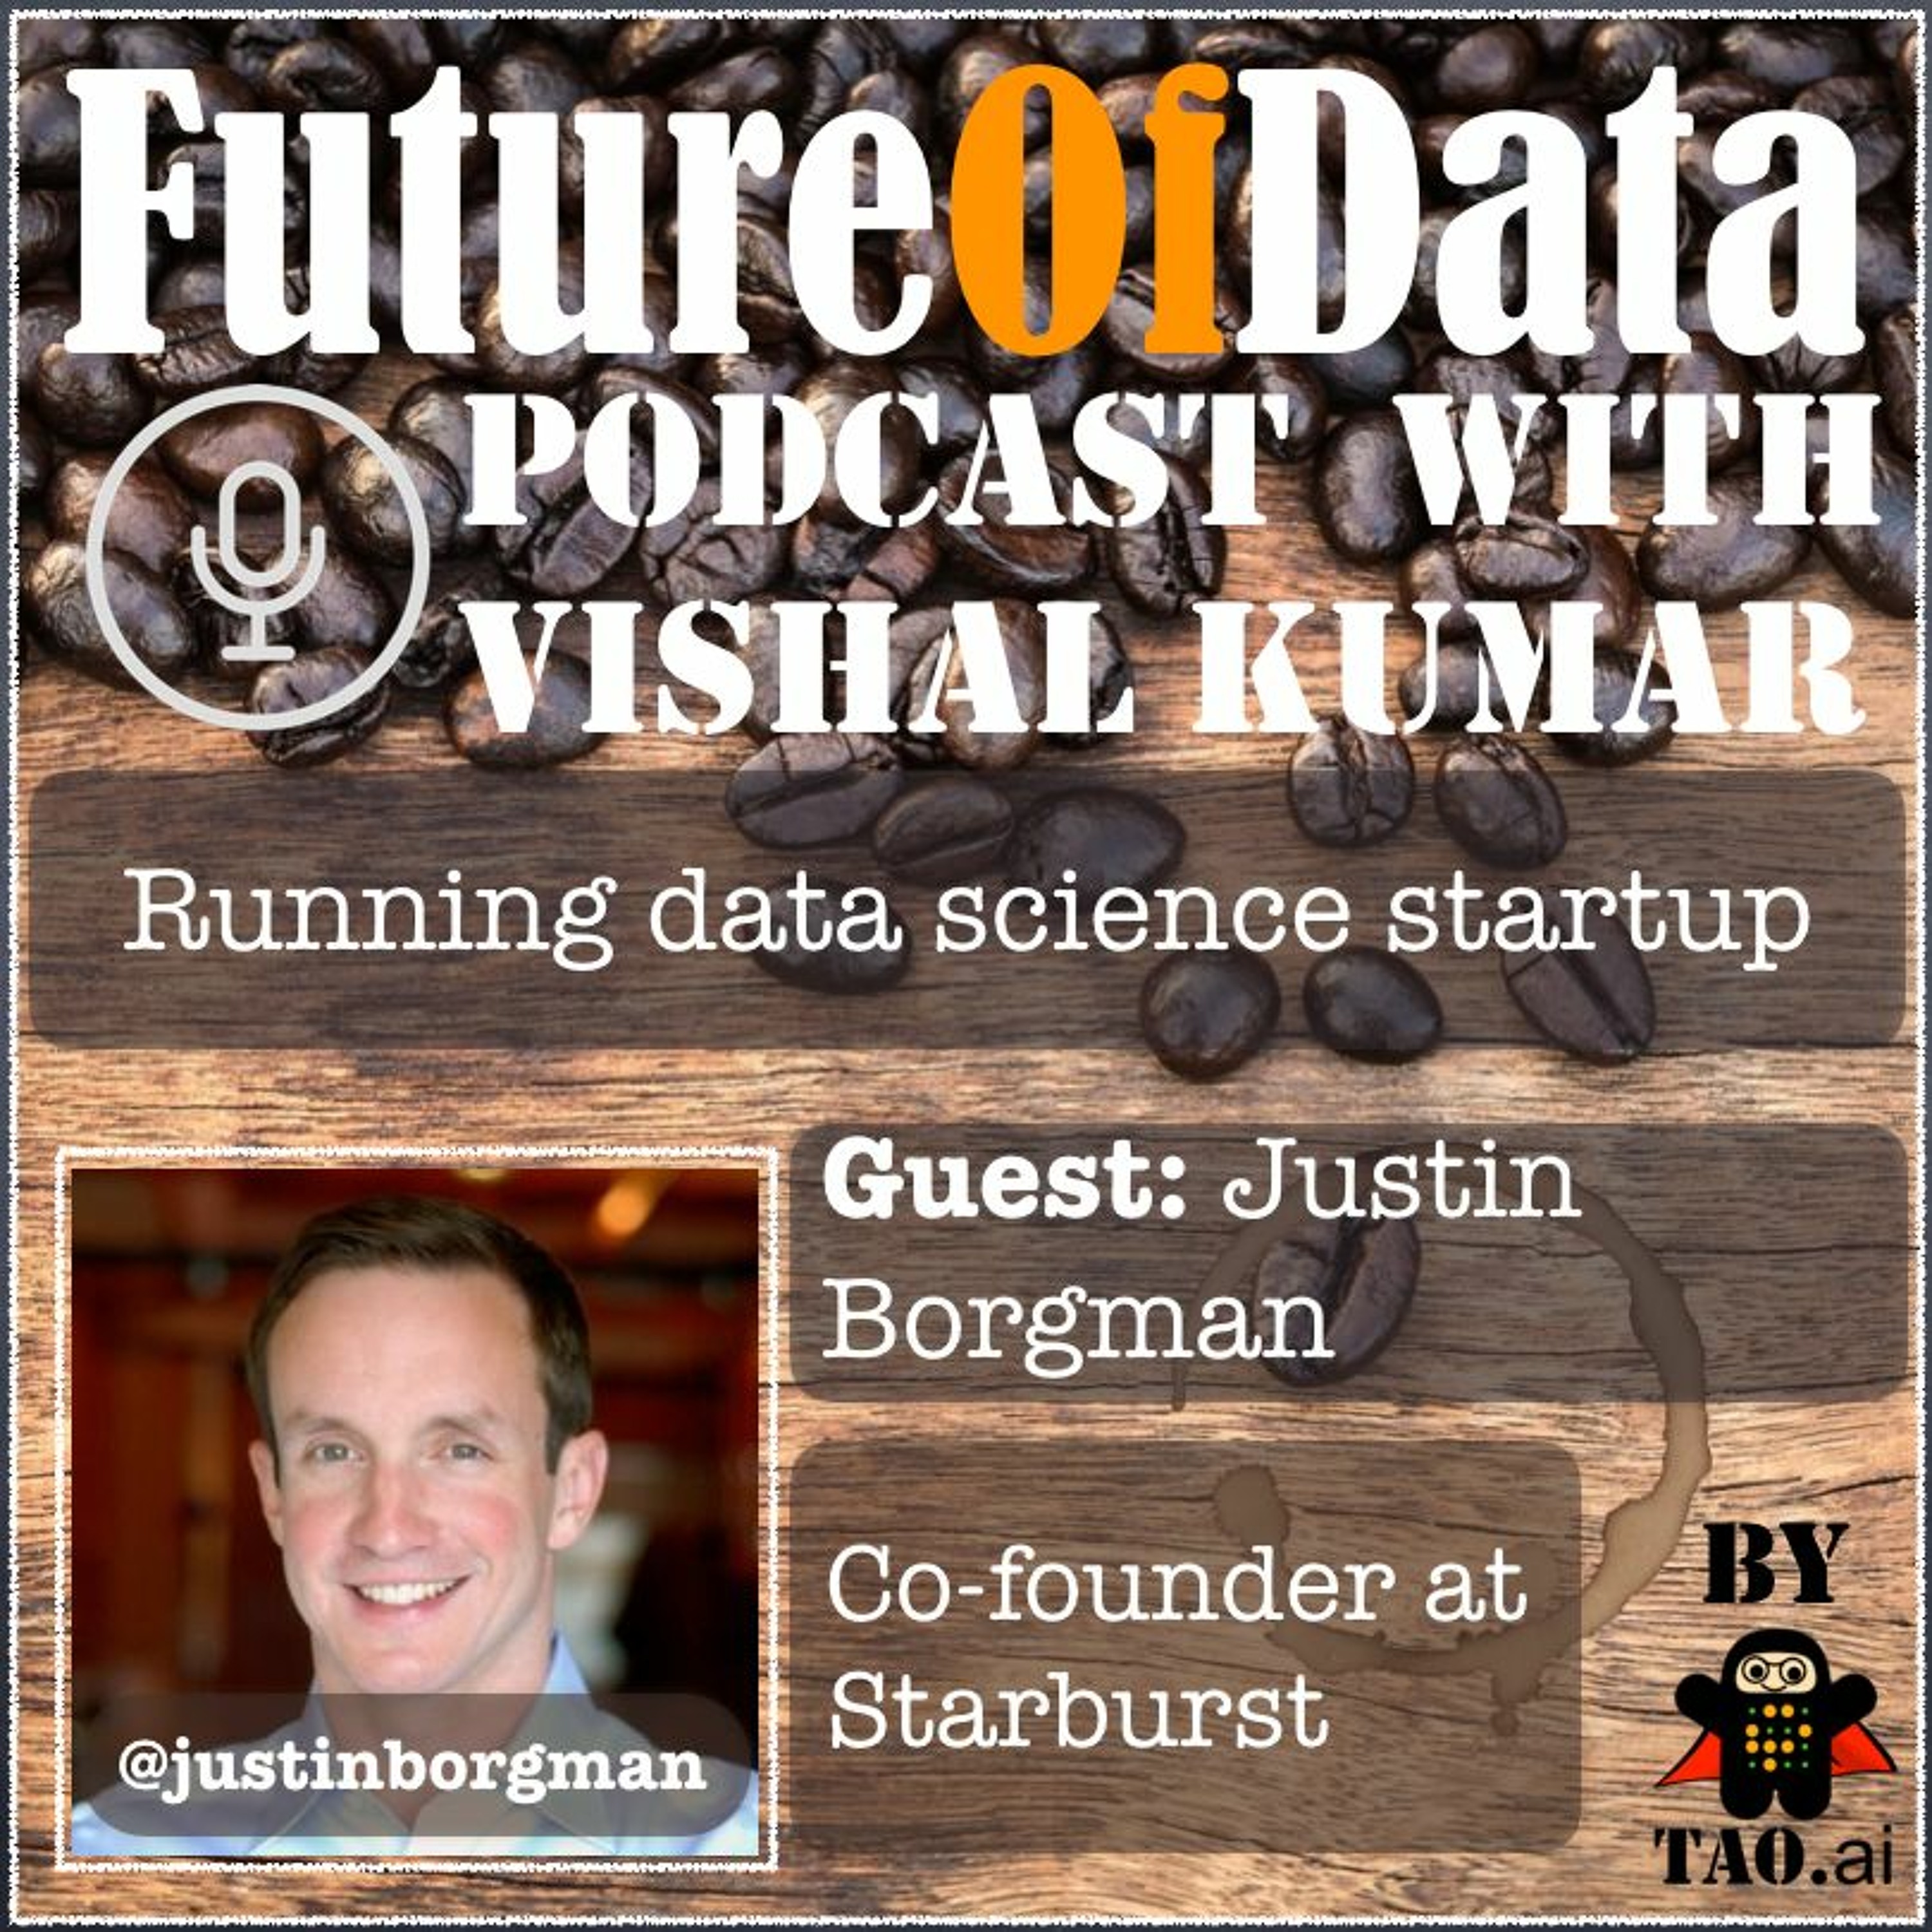 Running a data science startup, one decision at a time #Futureofdata podcast